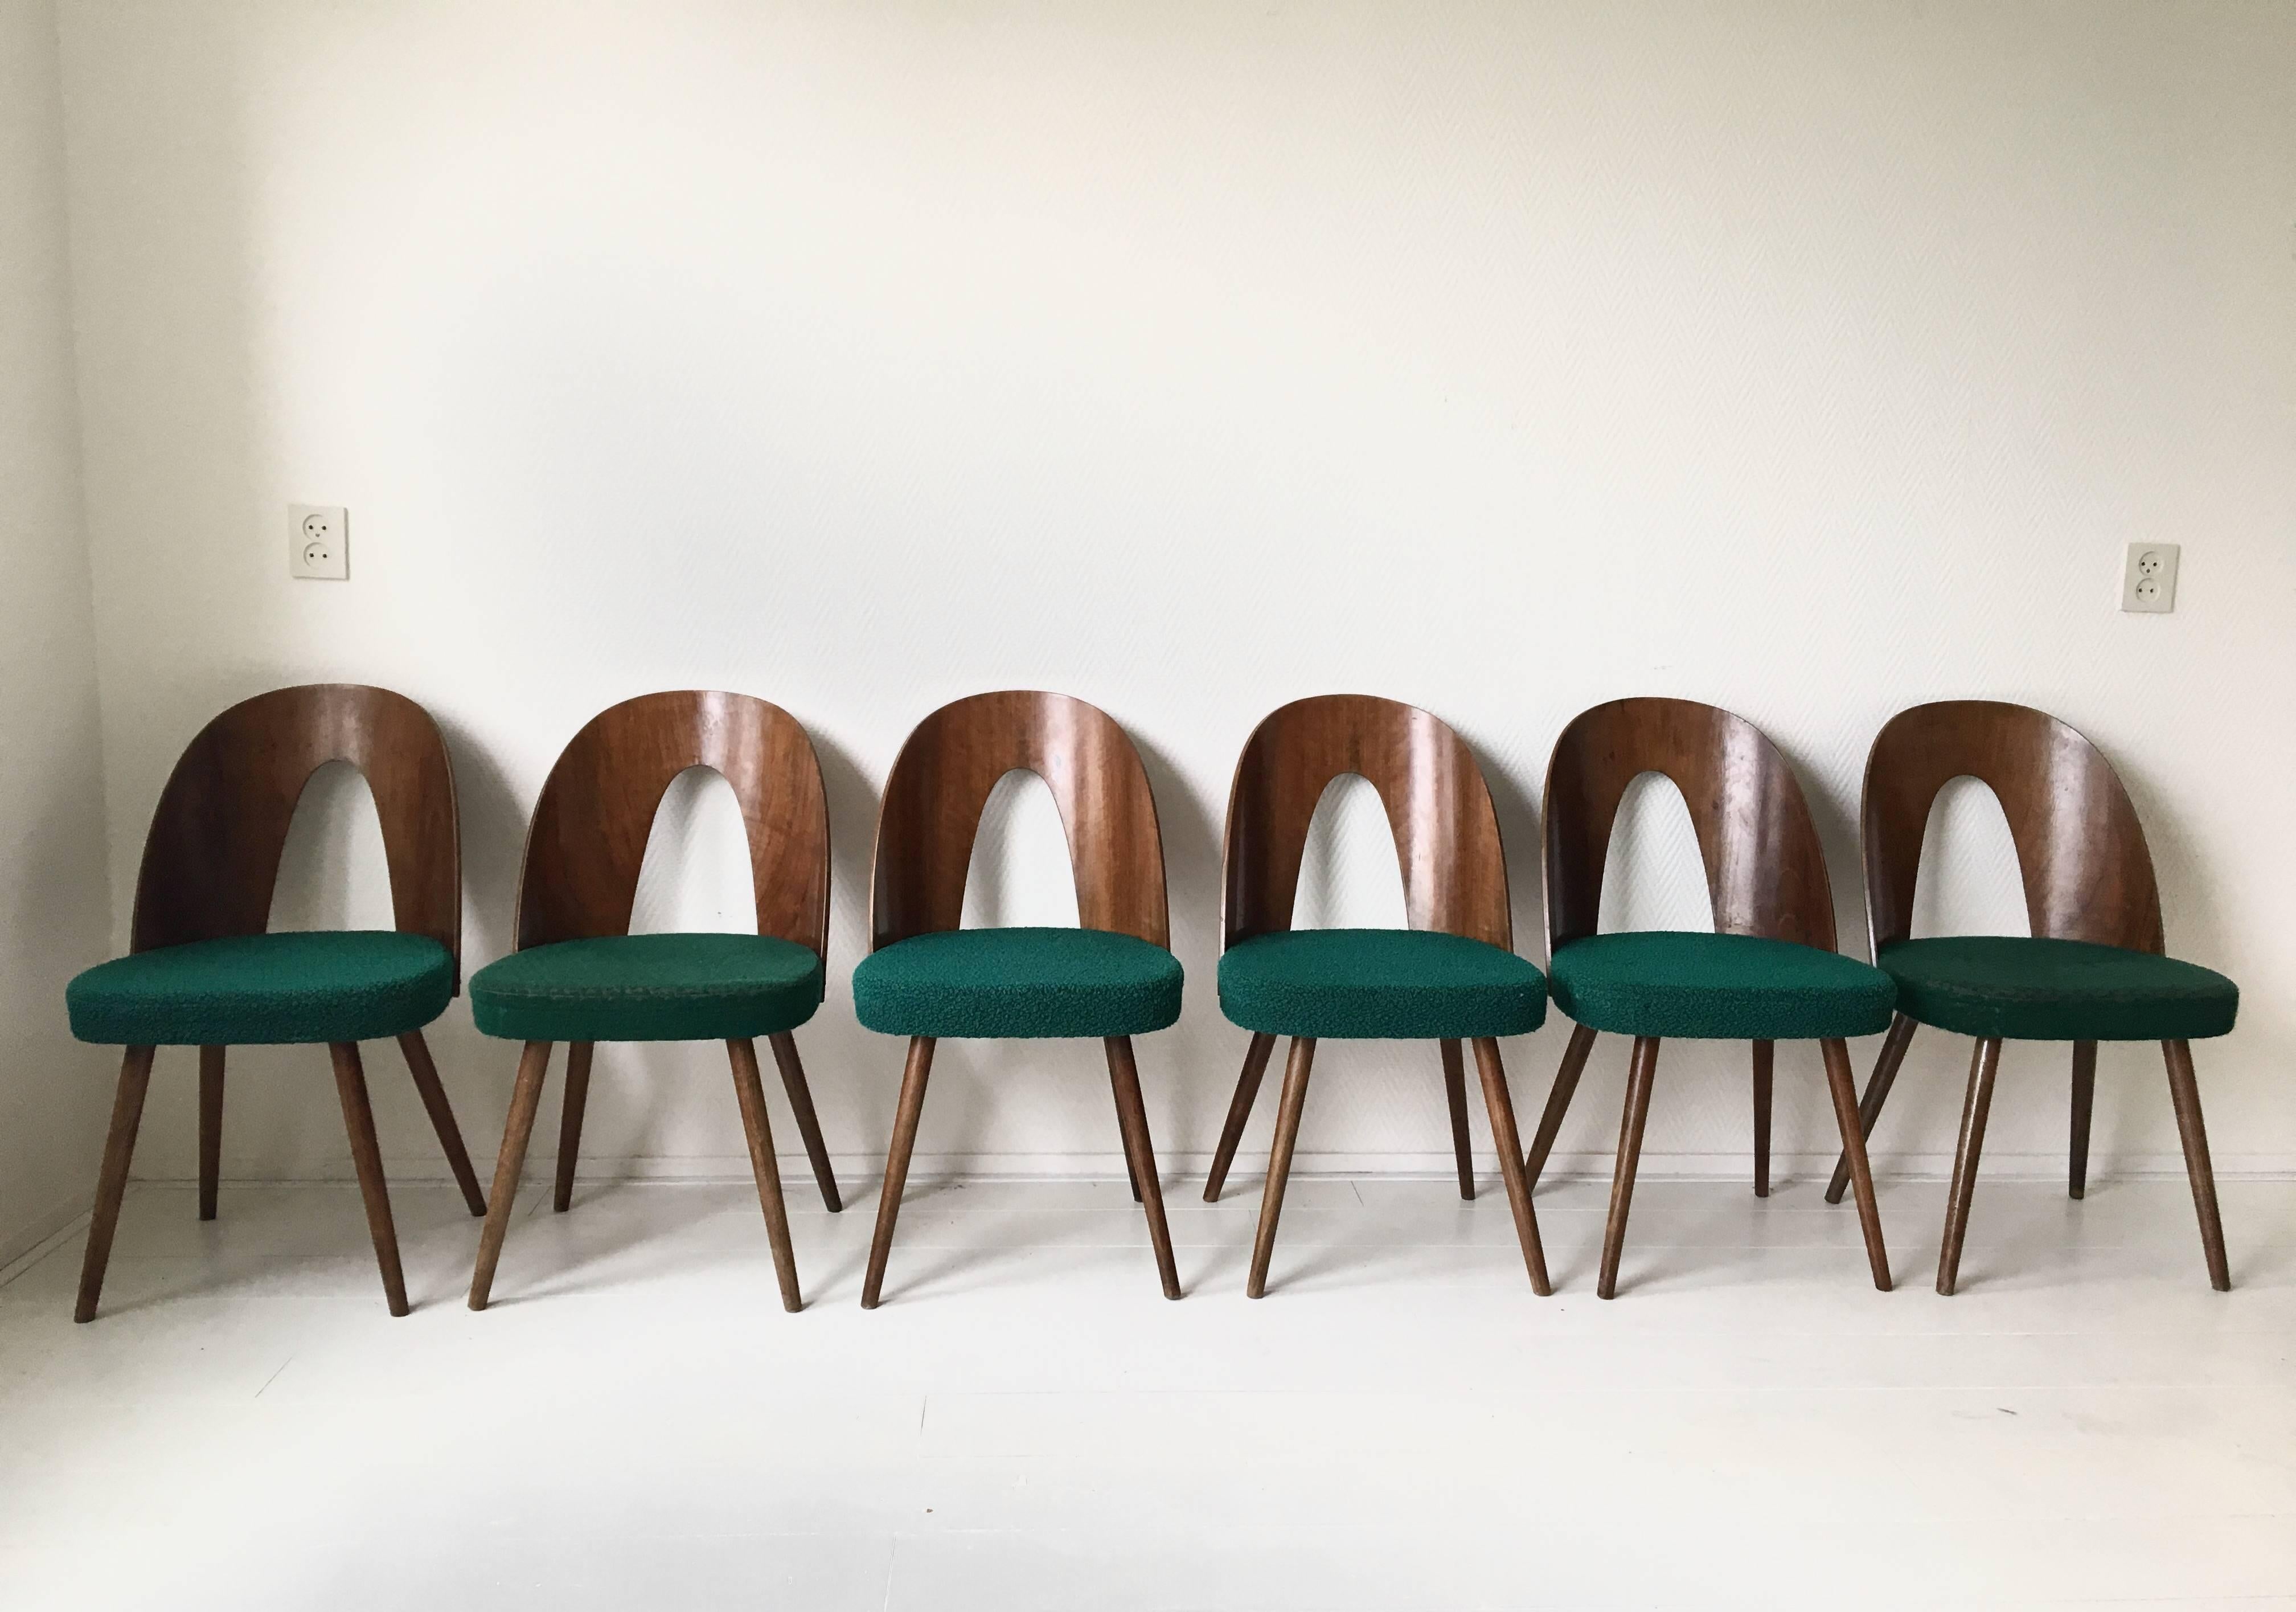 Mid-Century Modern Set of Six Most Green Dining Room Chairs by Antonin Suman for Zilina. SALE!